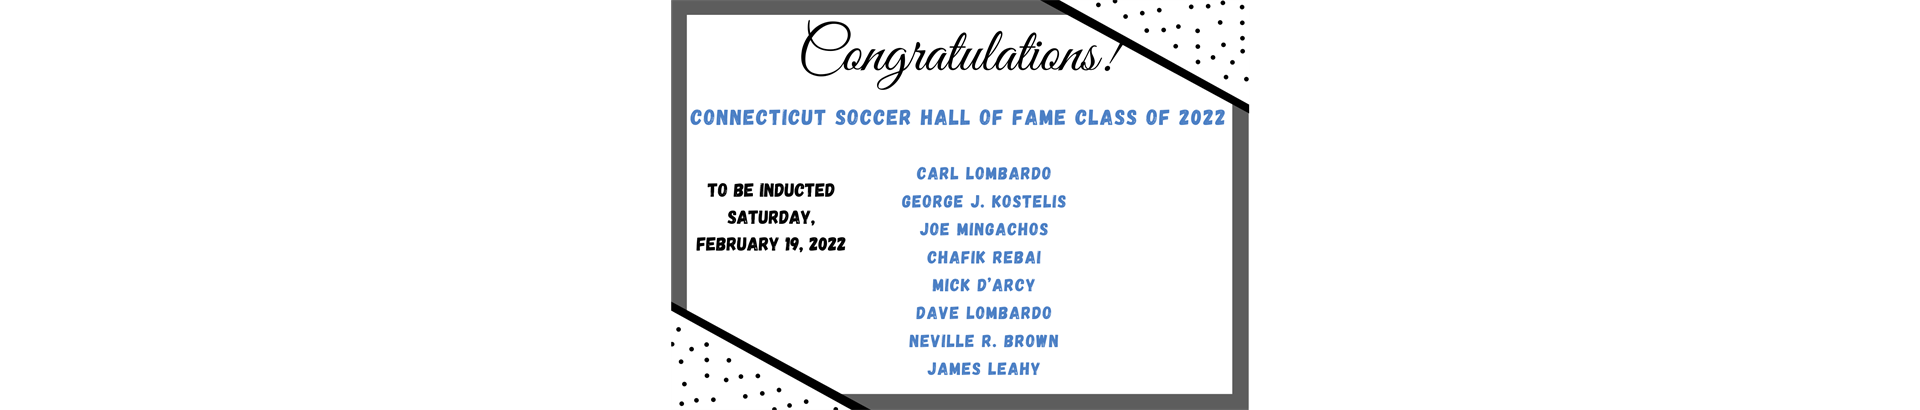 Connecticut Soccer Hall of Fame